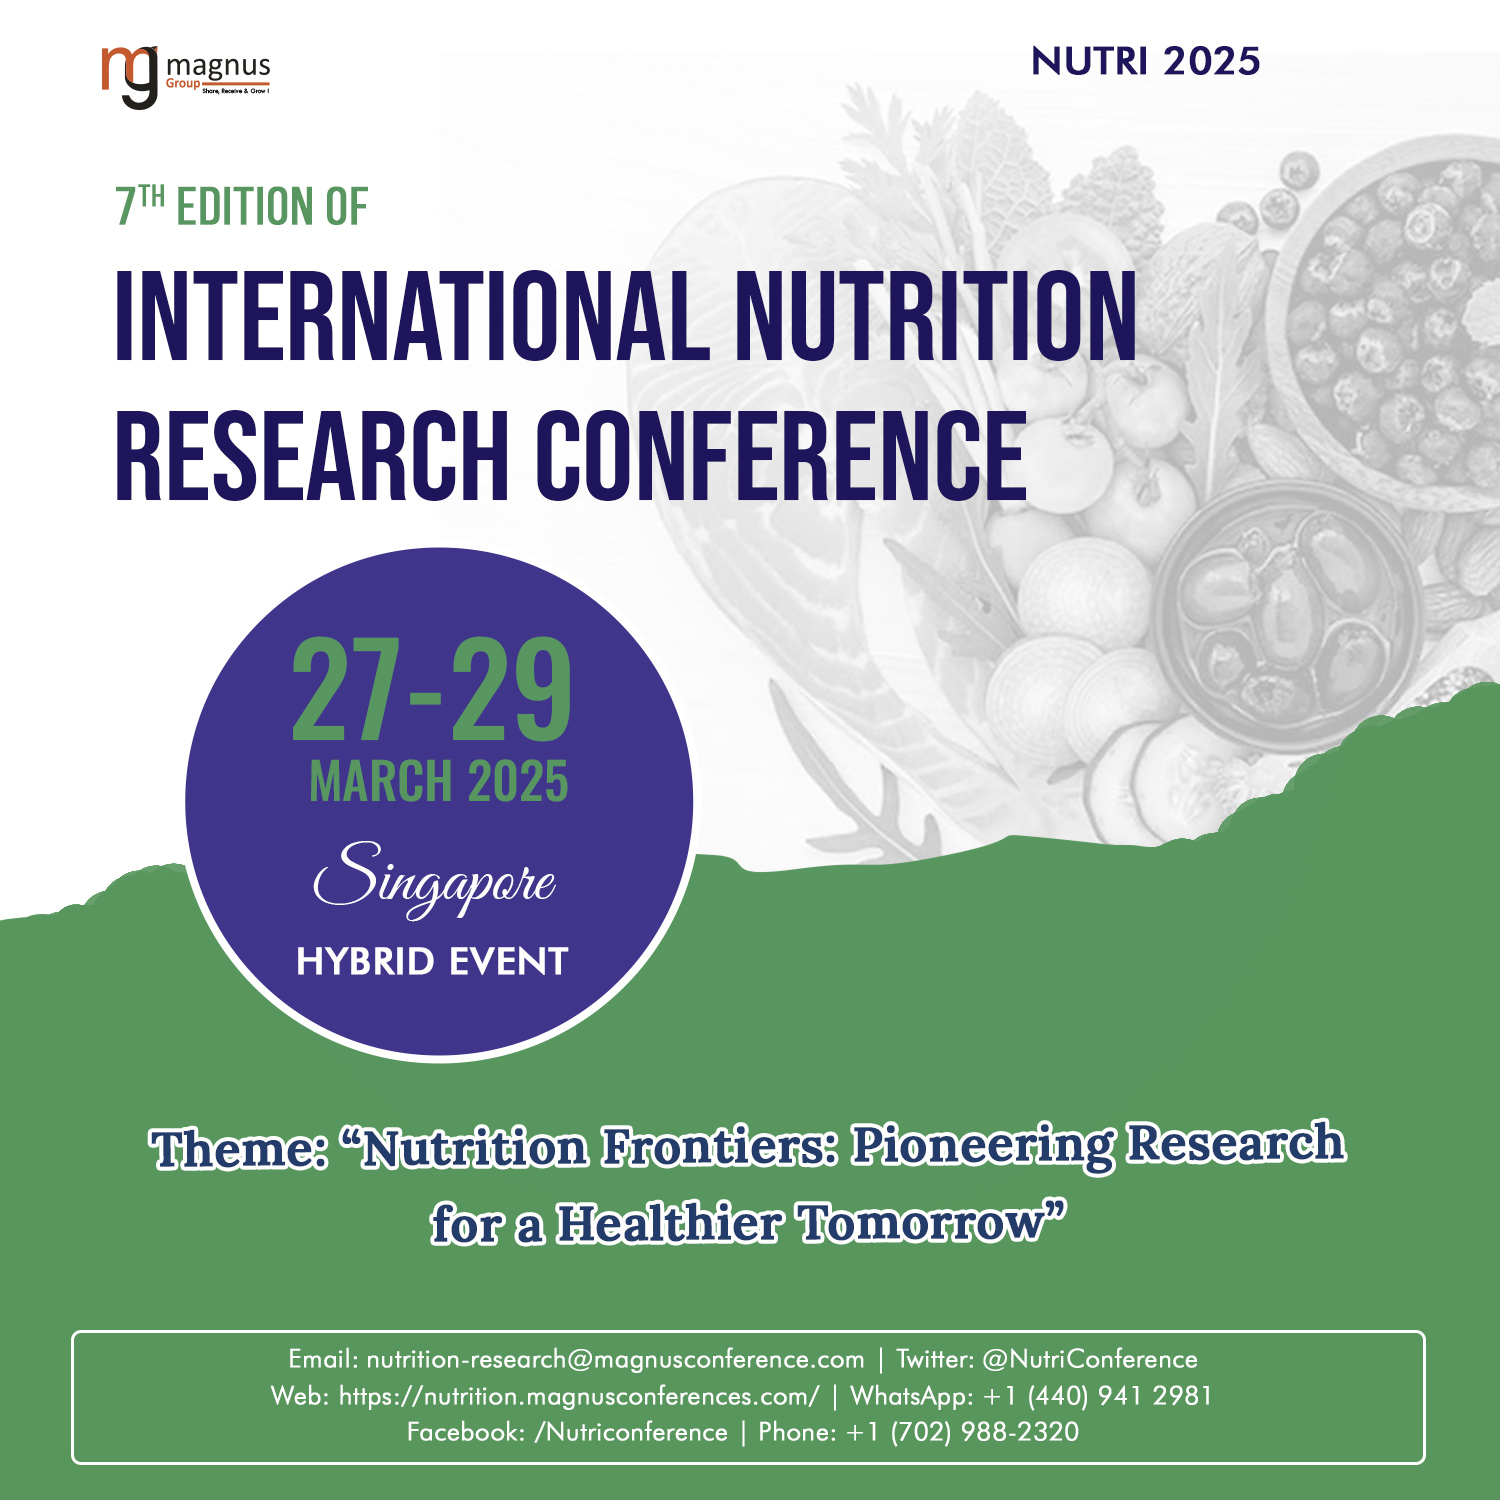 7th Edition of the International Nutrition Research Conference, Singapore